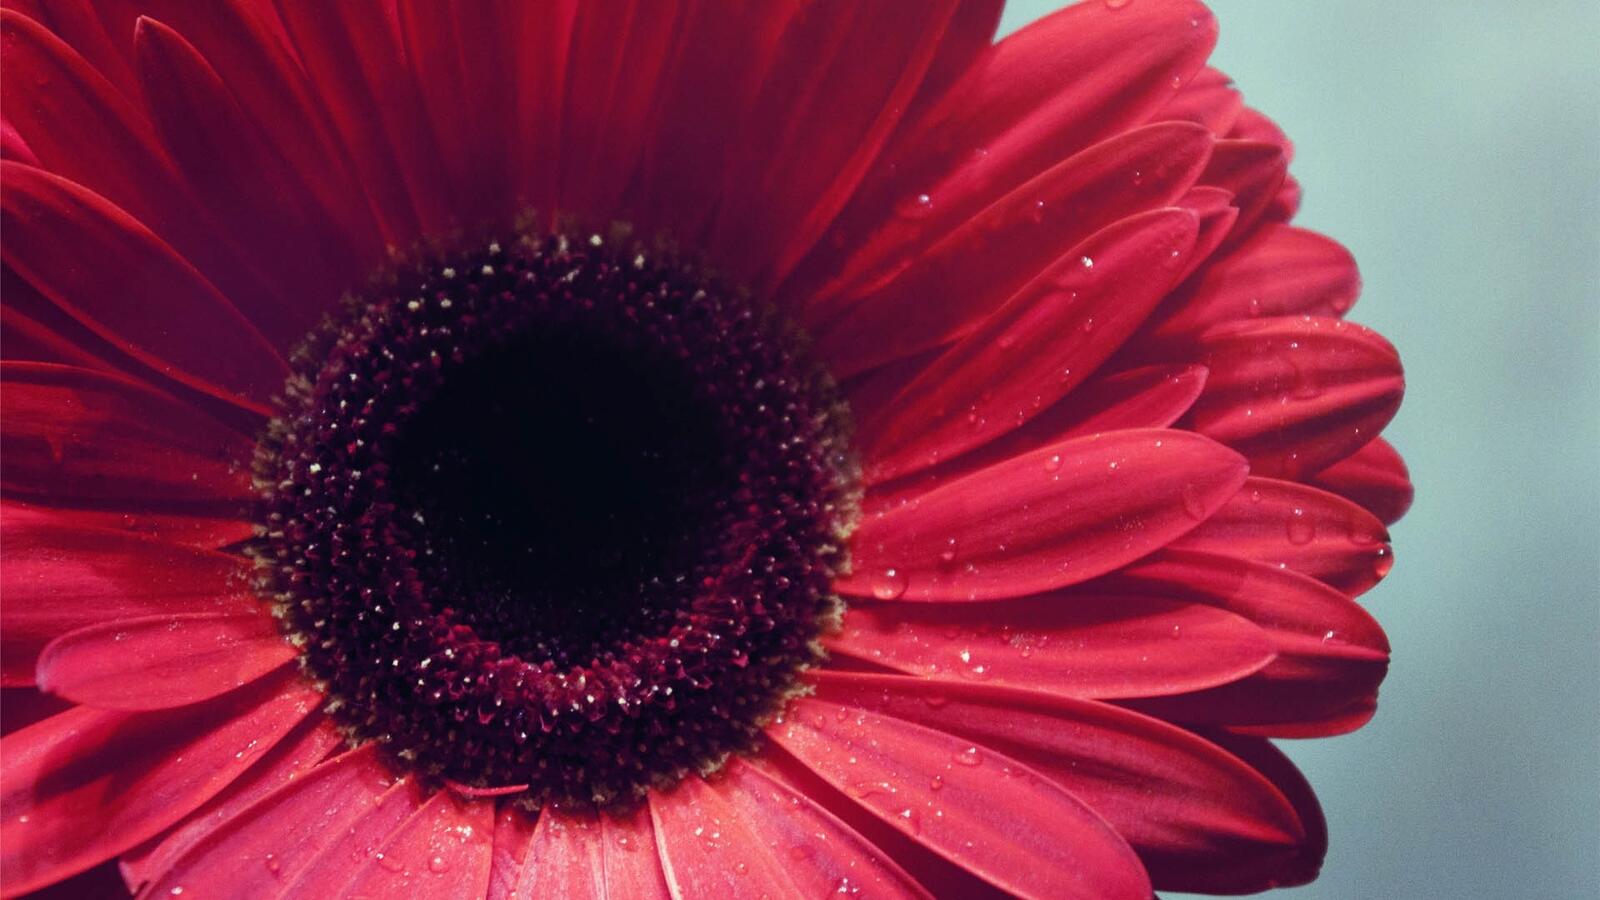 Free photo A large red flower with raindrops in close-up